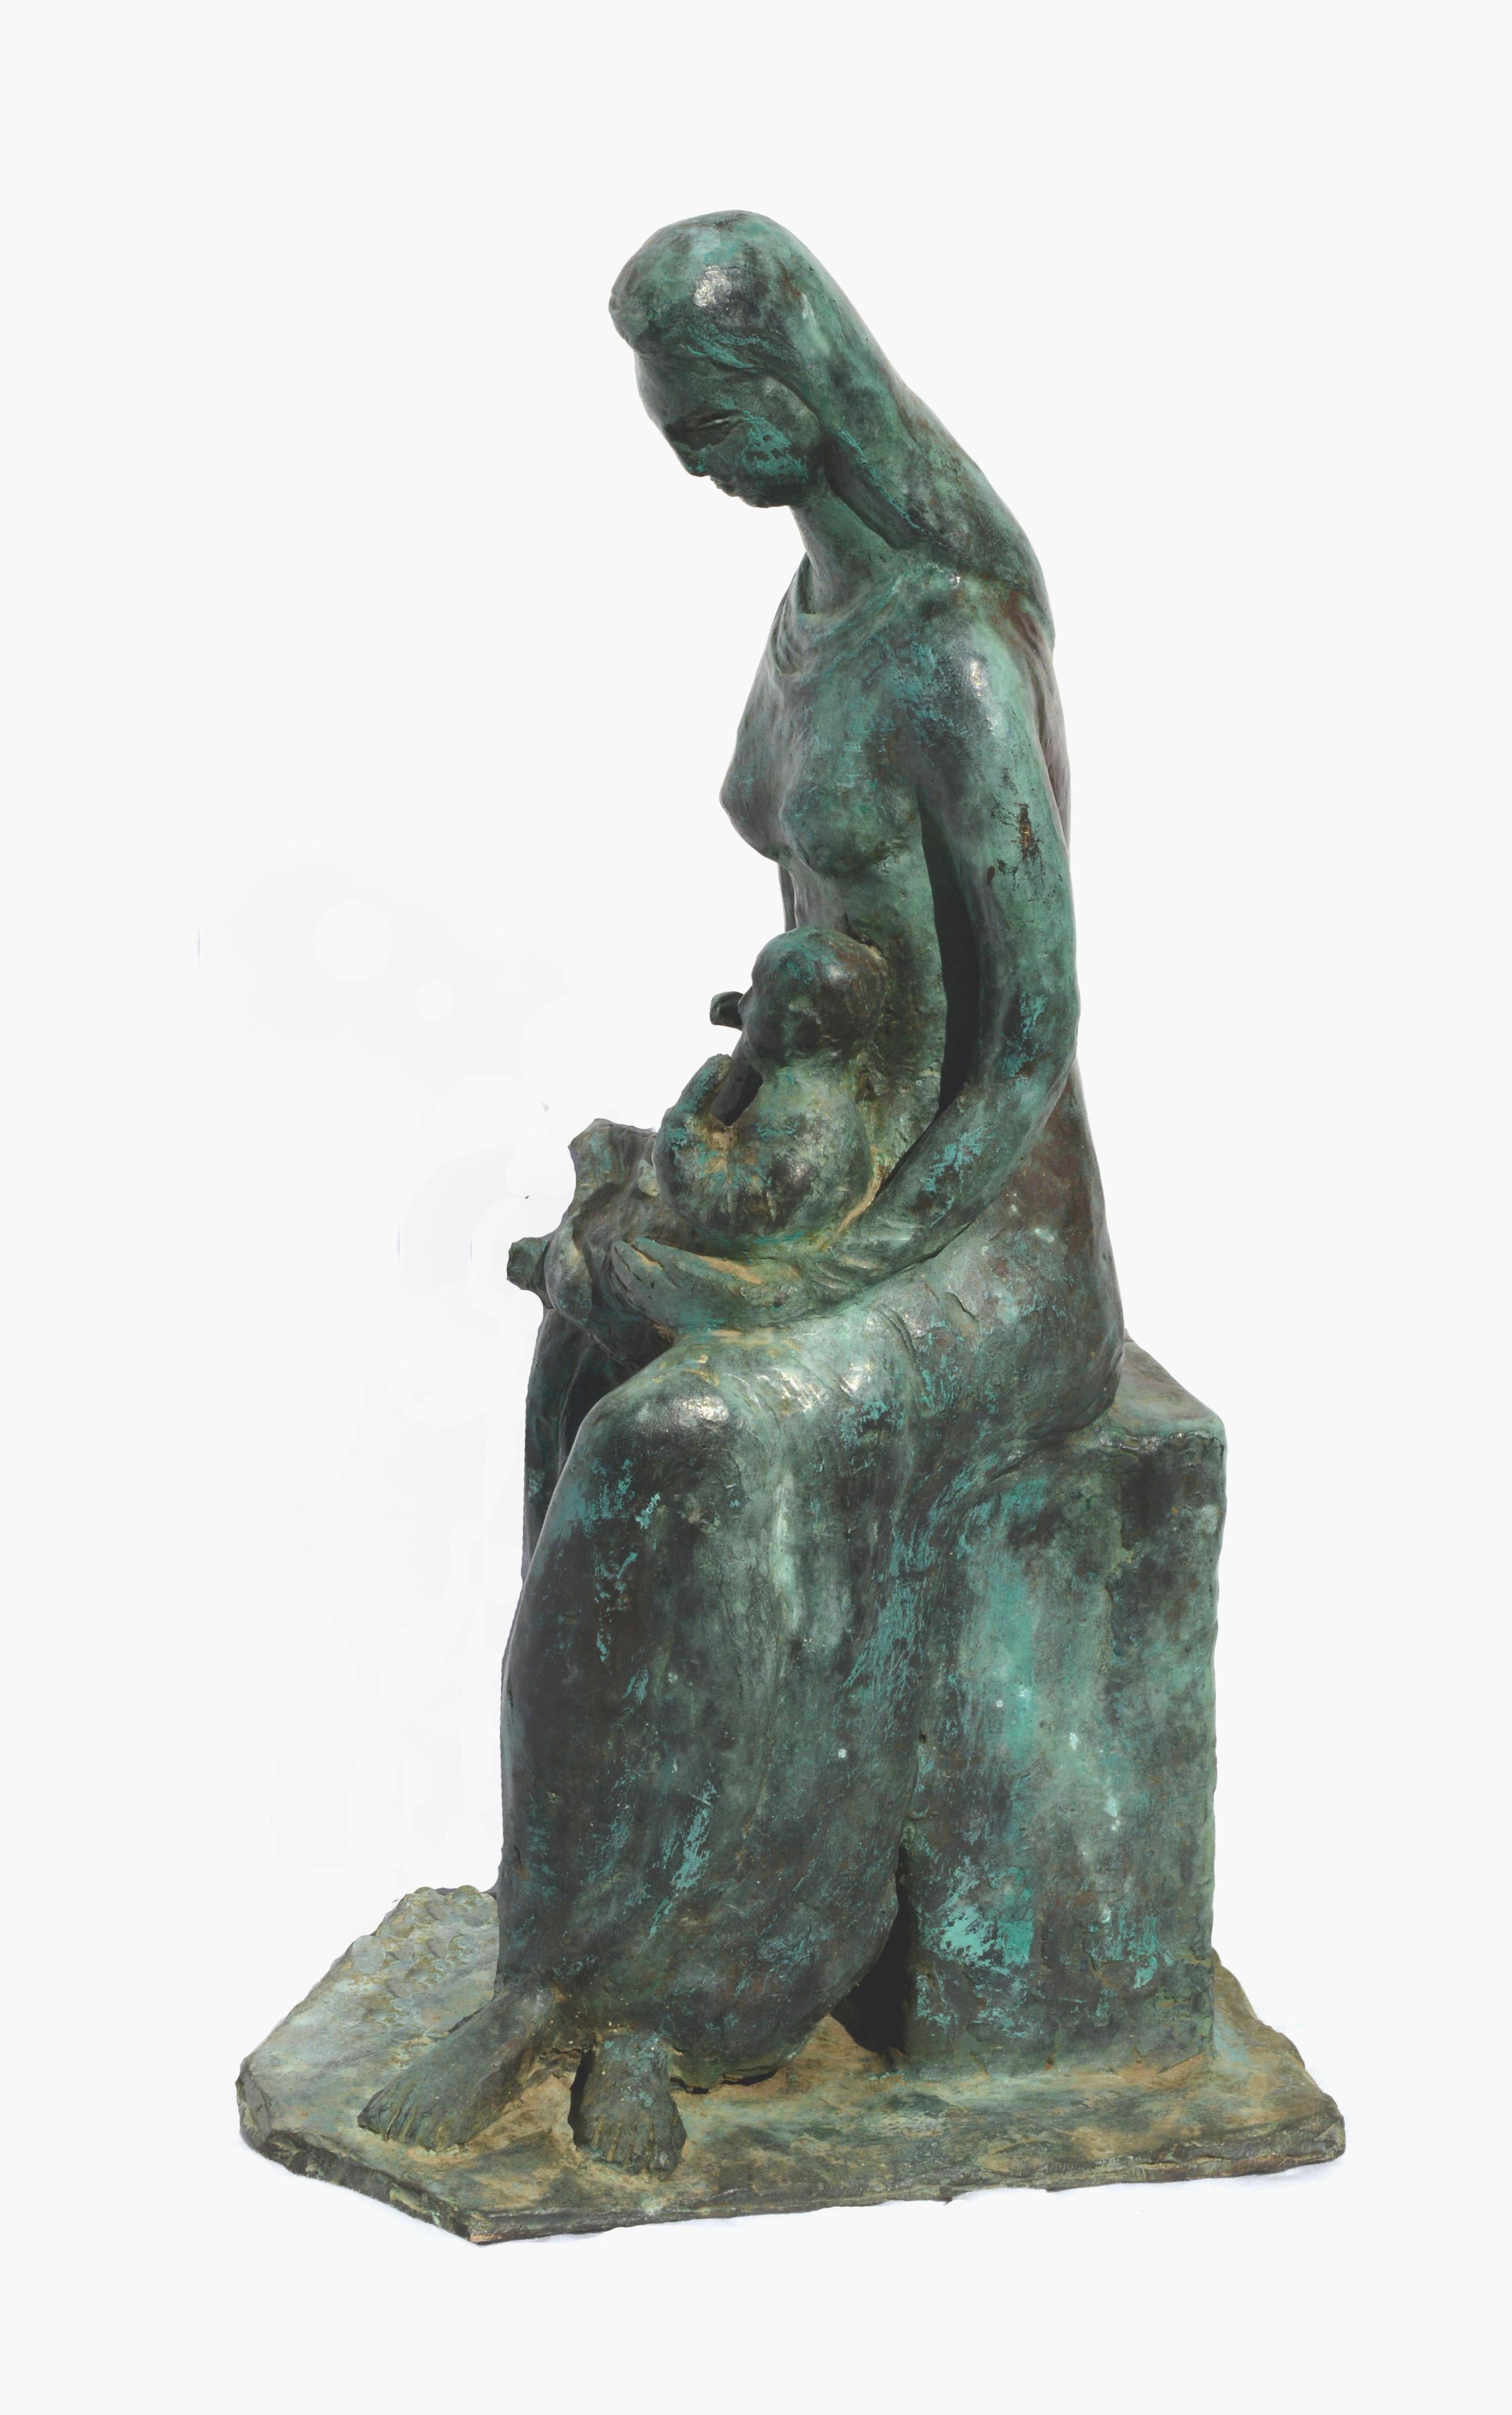 Expressive bronze sculpture of a mother holding an infant by Rose Van Vranken (American, 1918-2013). Signed and numbered 